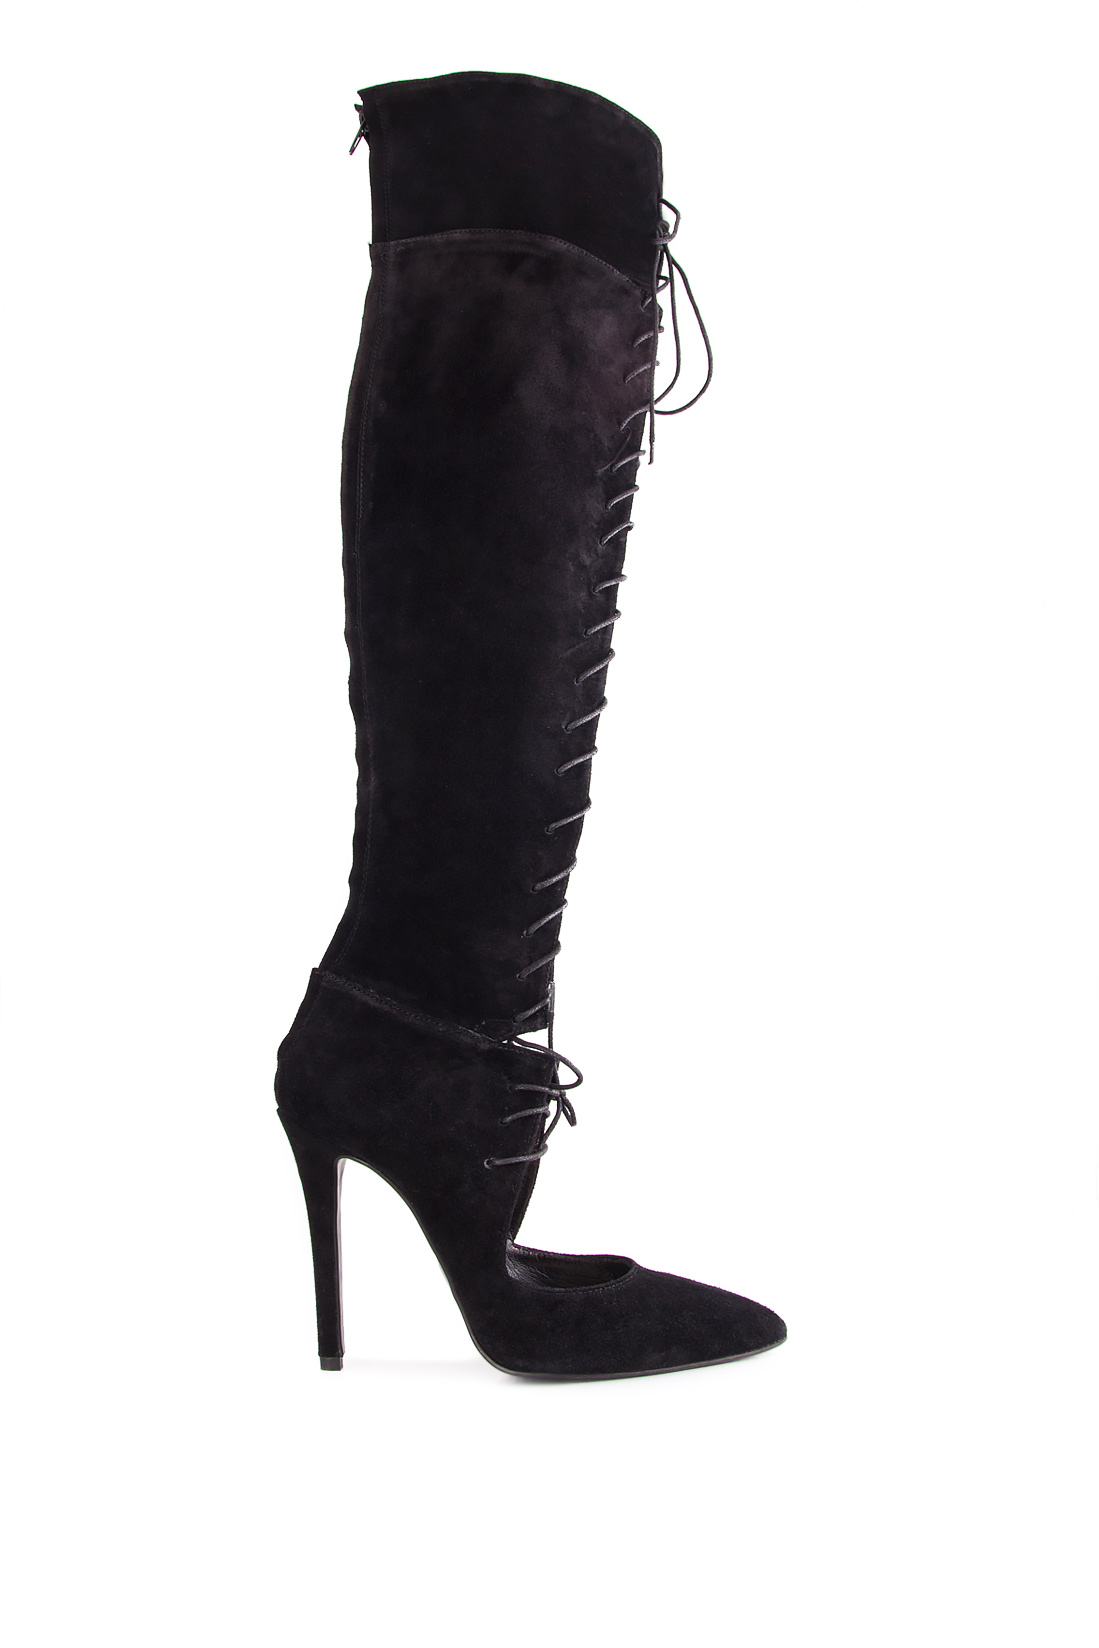 Cutout suede over-the-knee boots Ana Kaloni image 0